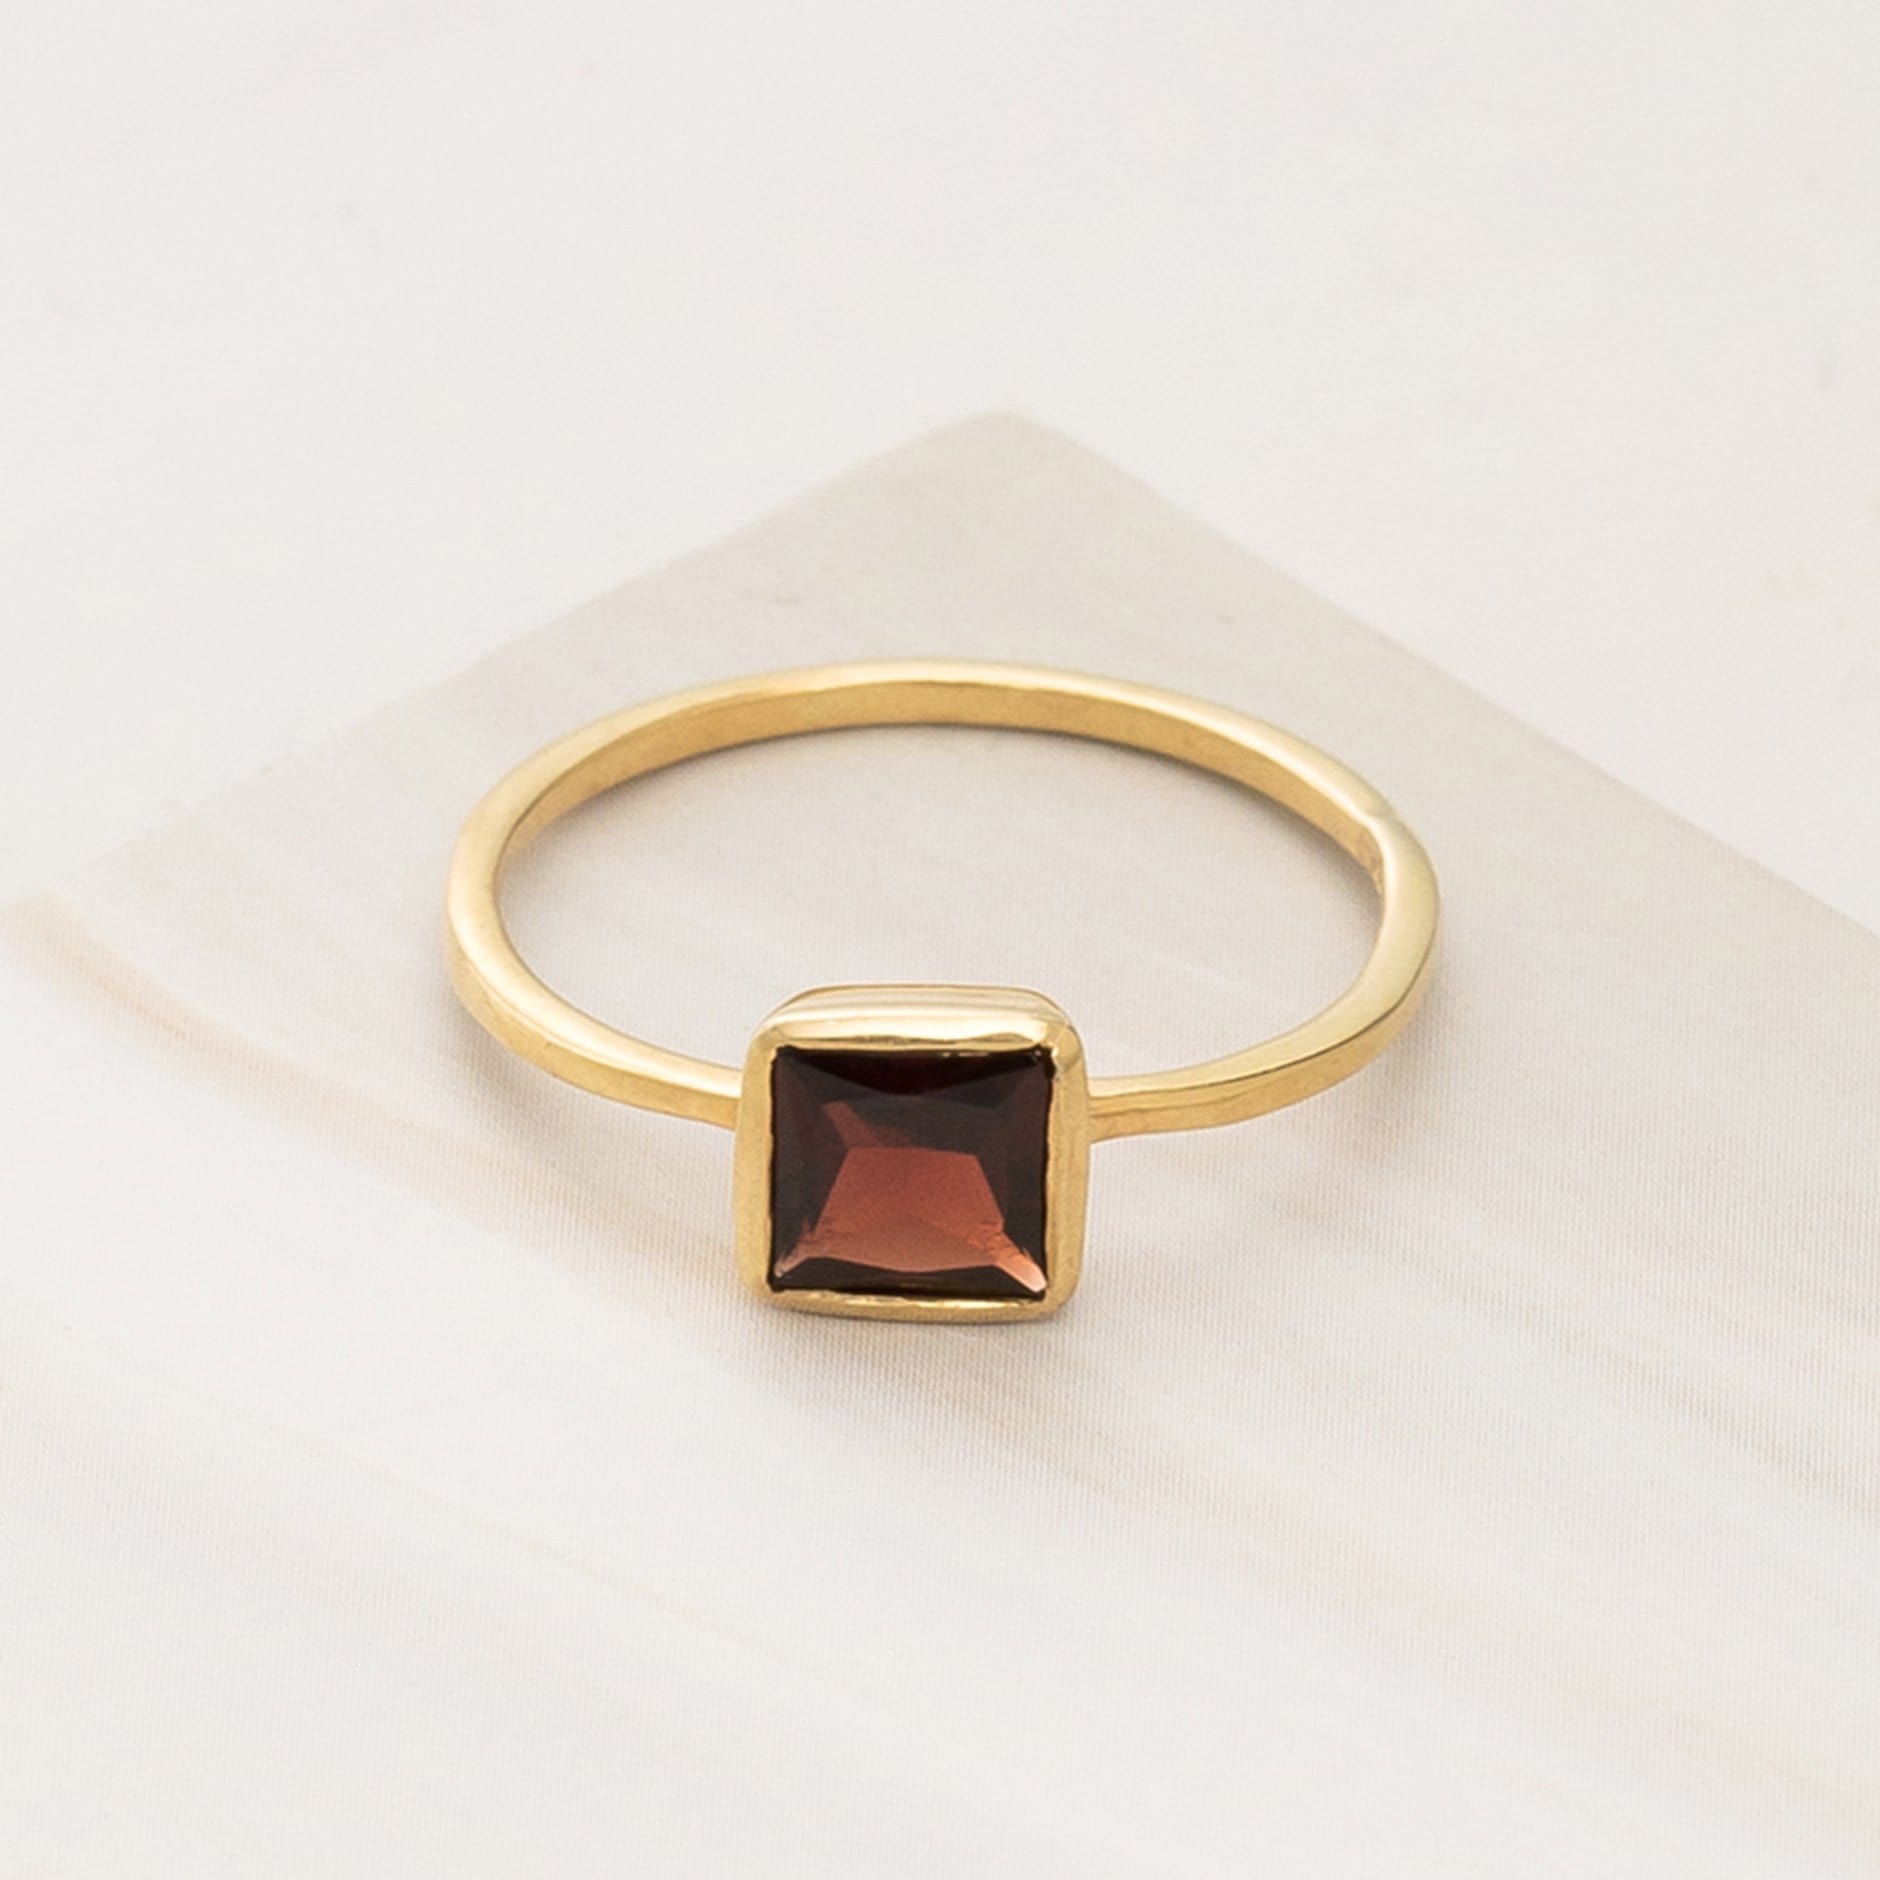 Emblem Jewelry Rings Red Garnet / Square Signature Candy Gemstone Stack Rings (Ring Size 6)